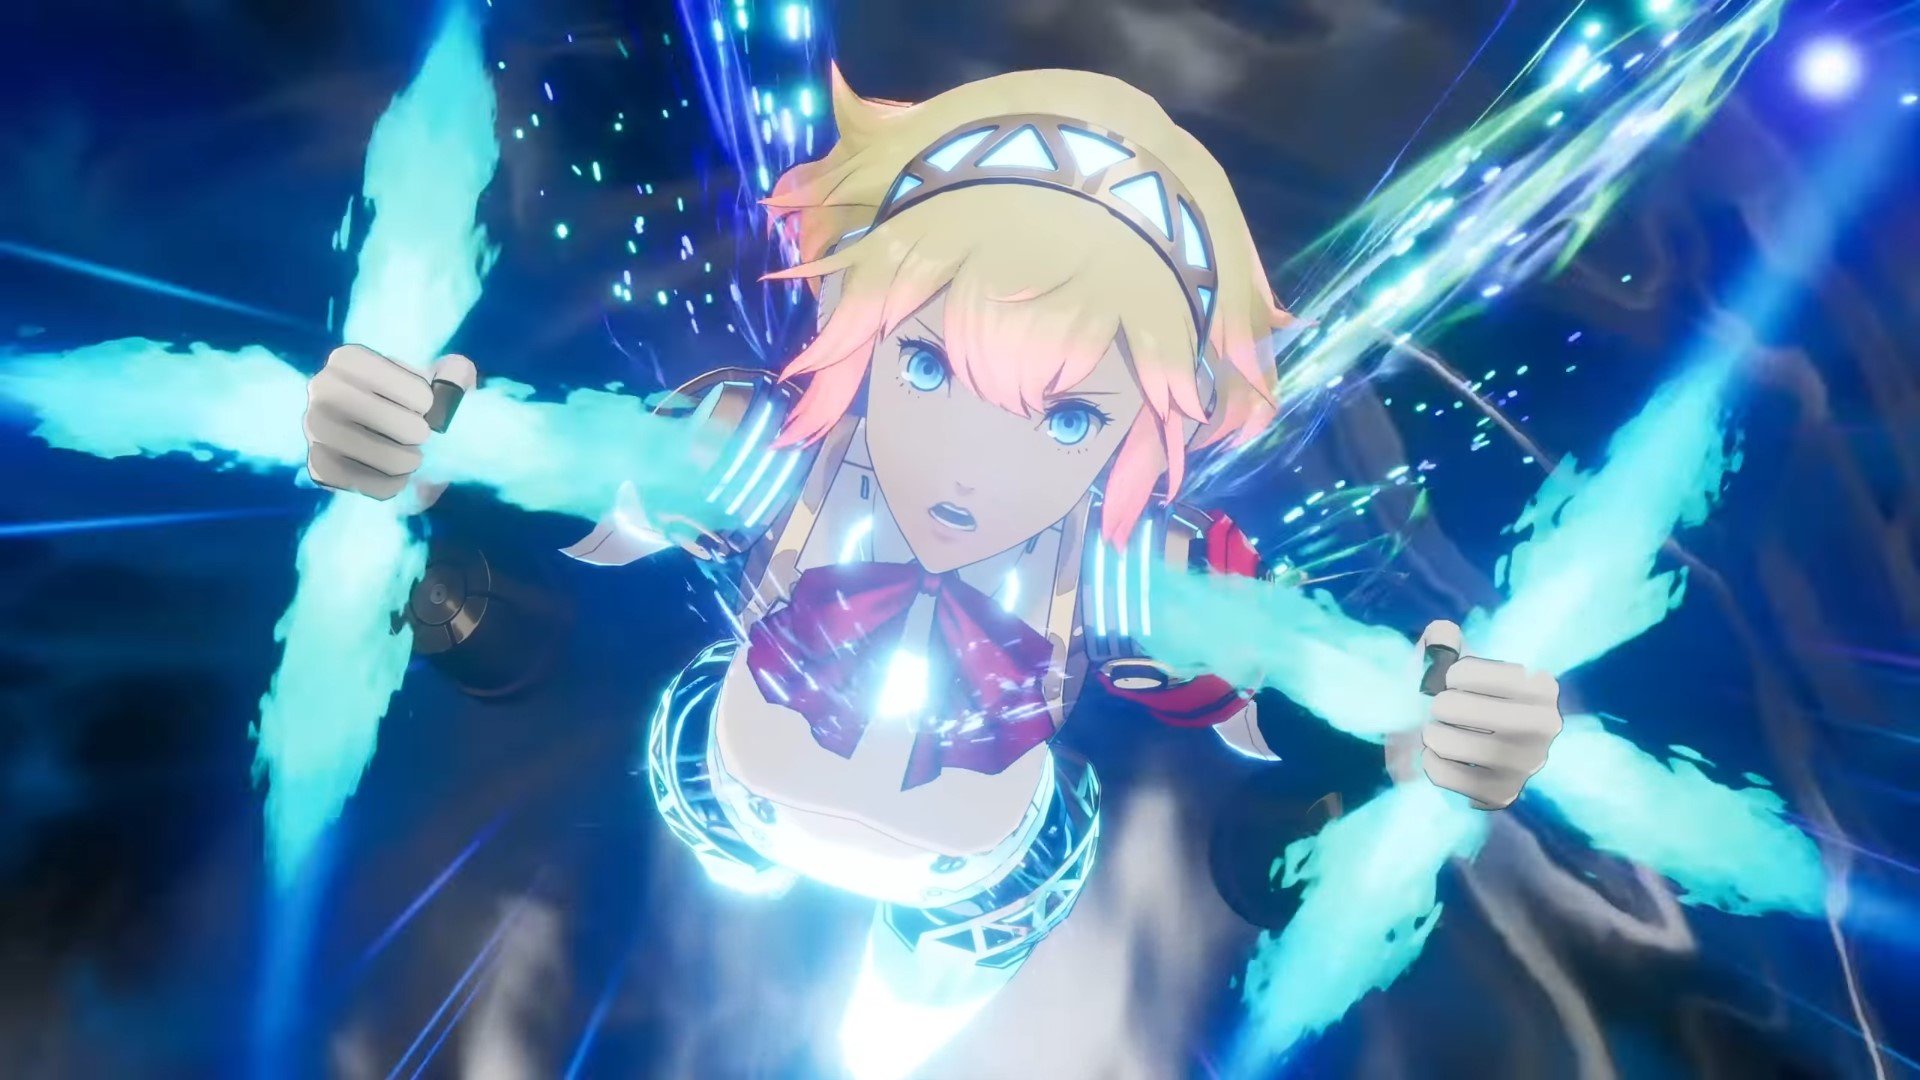 Persona 3 Reload Presents Aigis in New Trailer - PSLegends